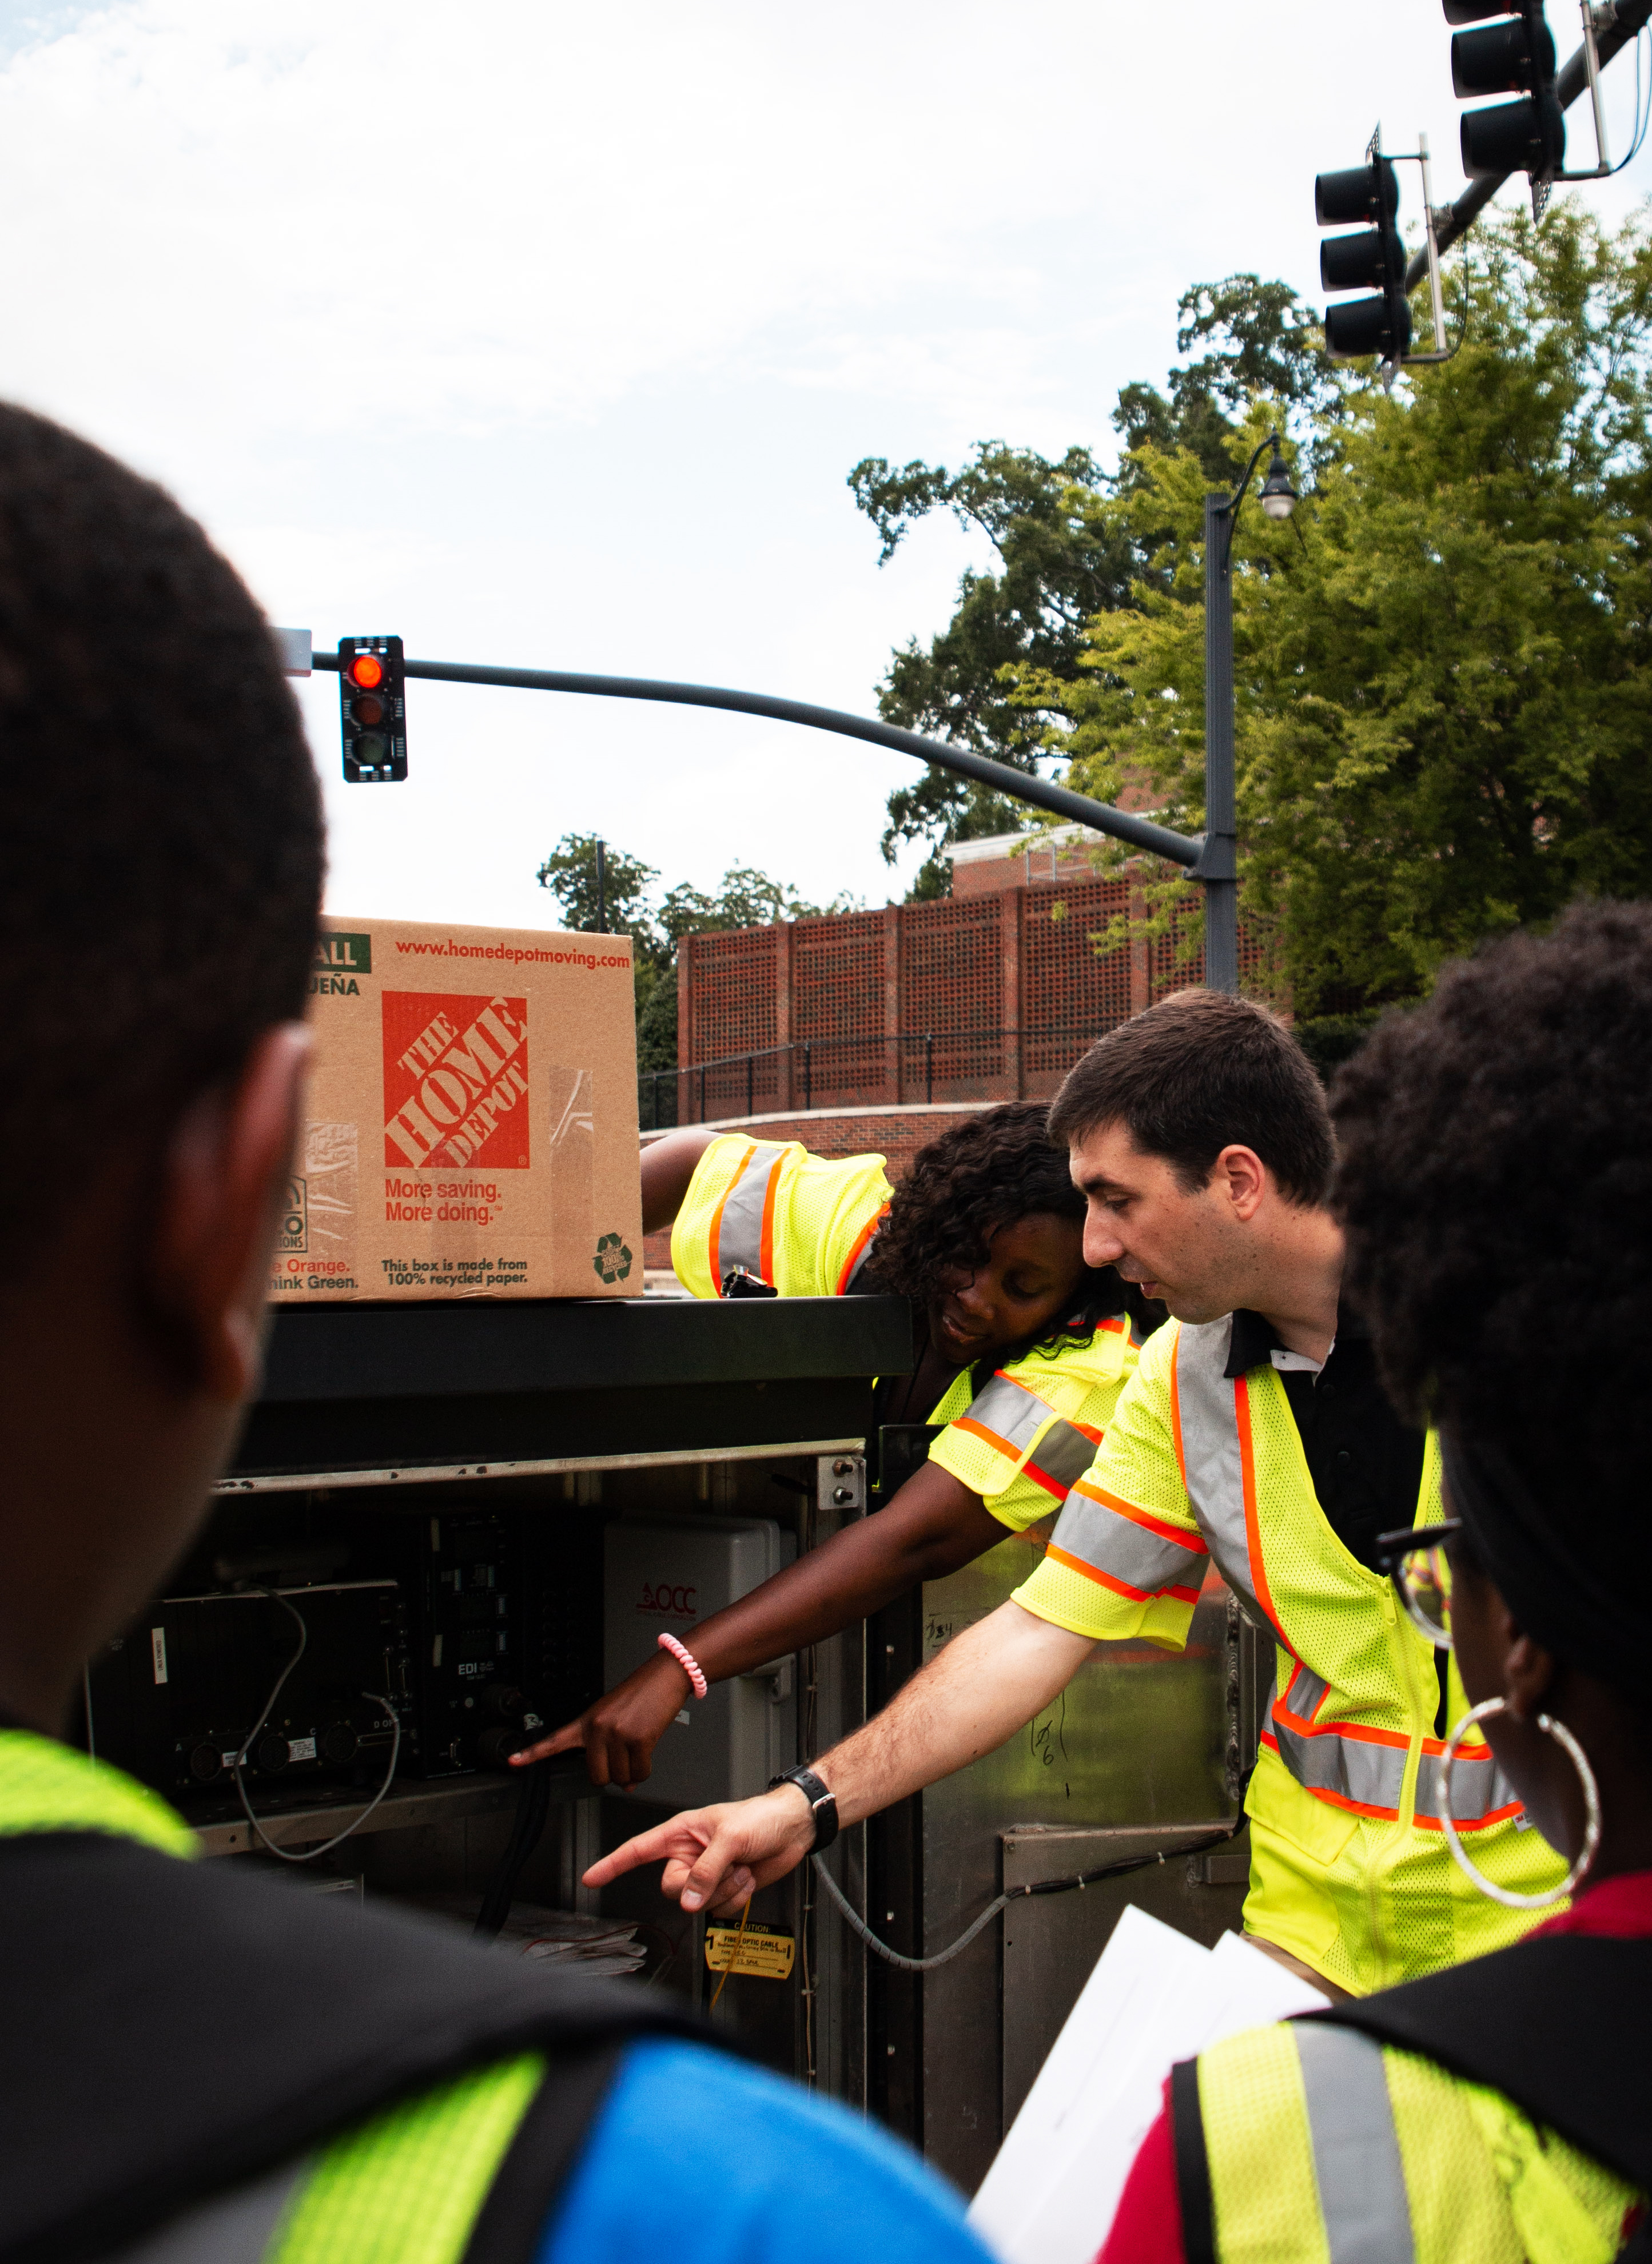 Engineering faculty member Dr. Alexander Hainen shows STEM camp students how traffic signals work.